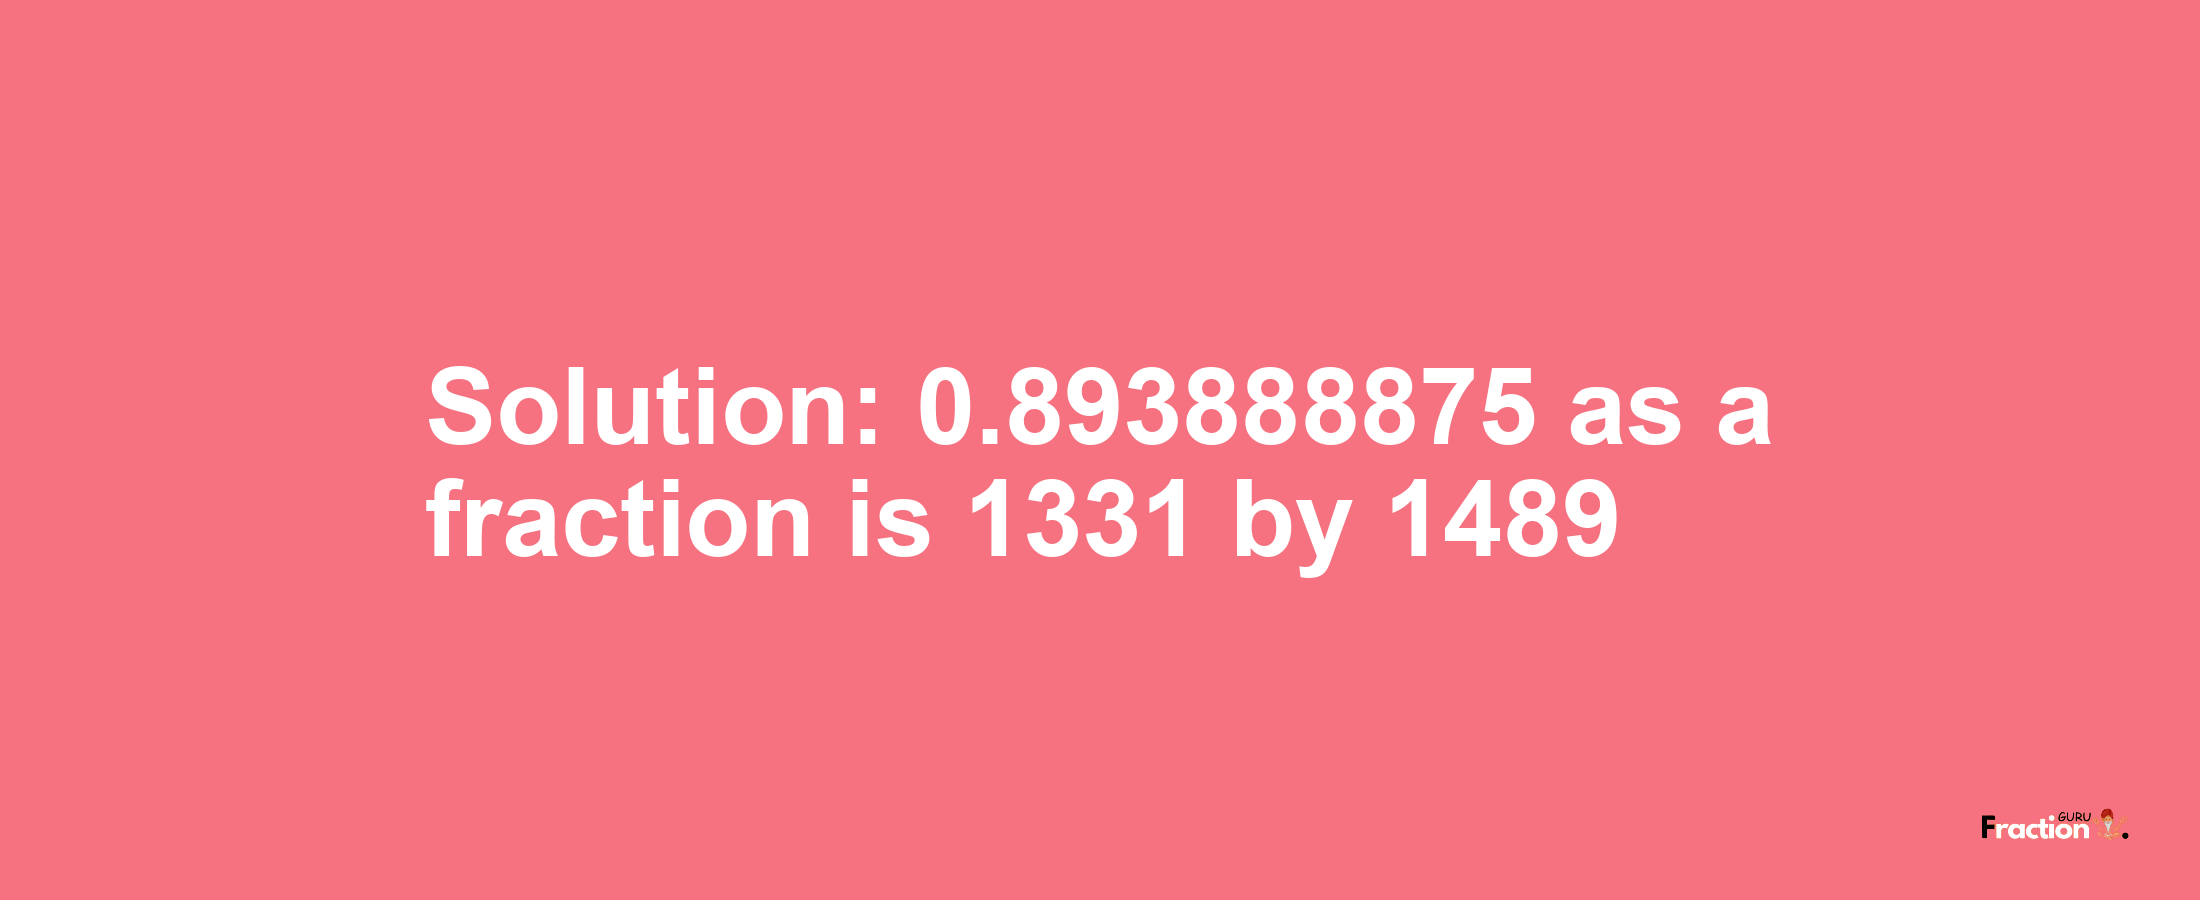 Solution:0.893888875 as a fraction is 1331/1489